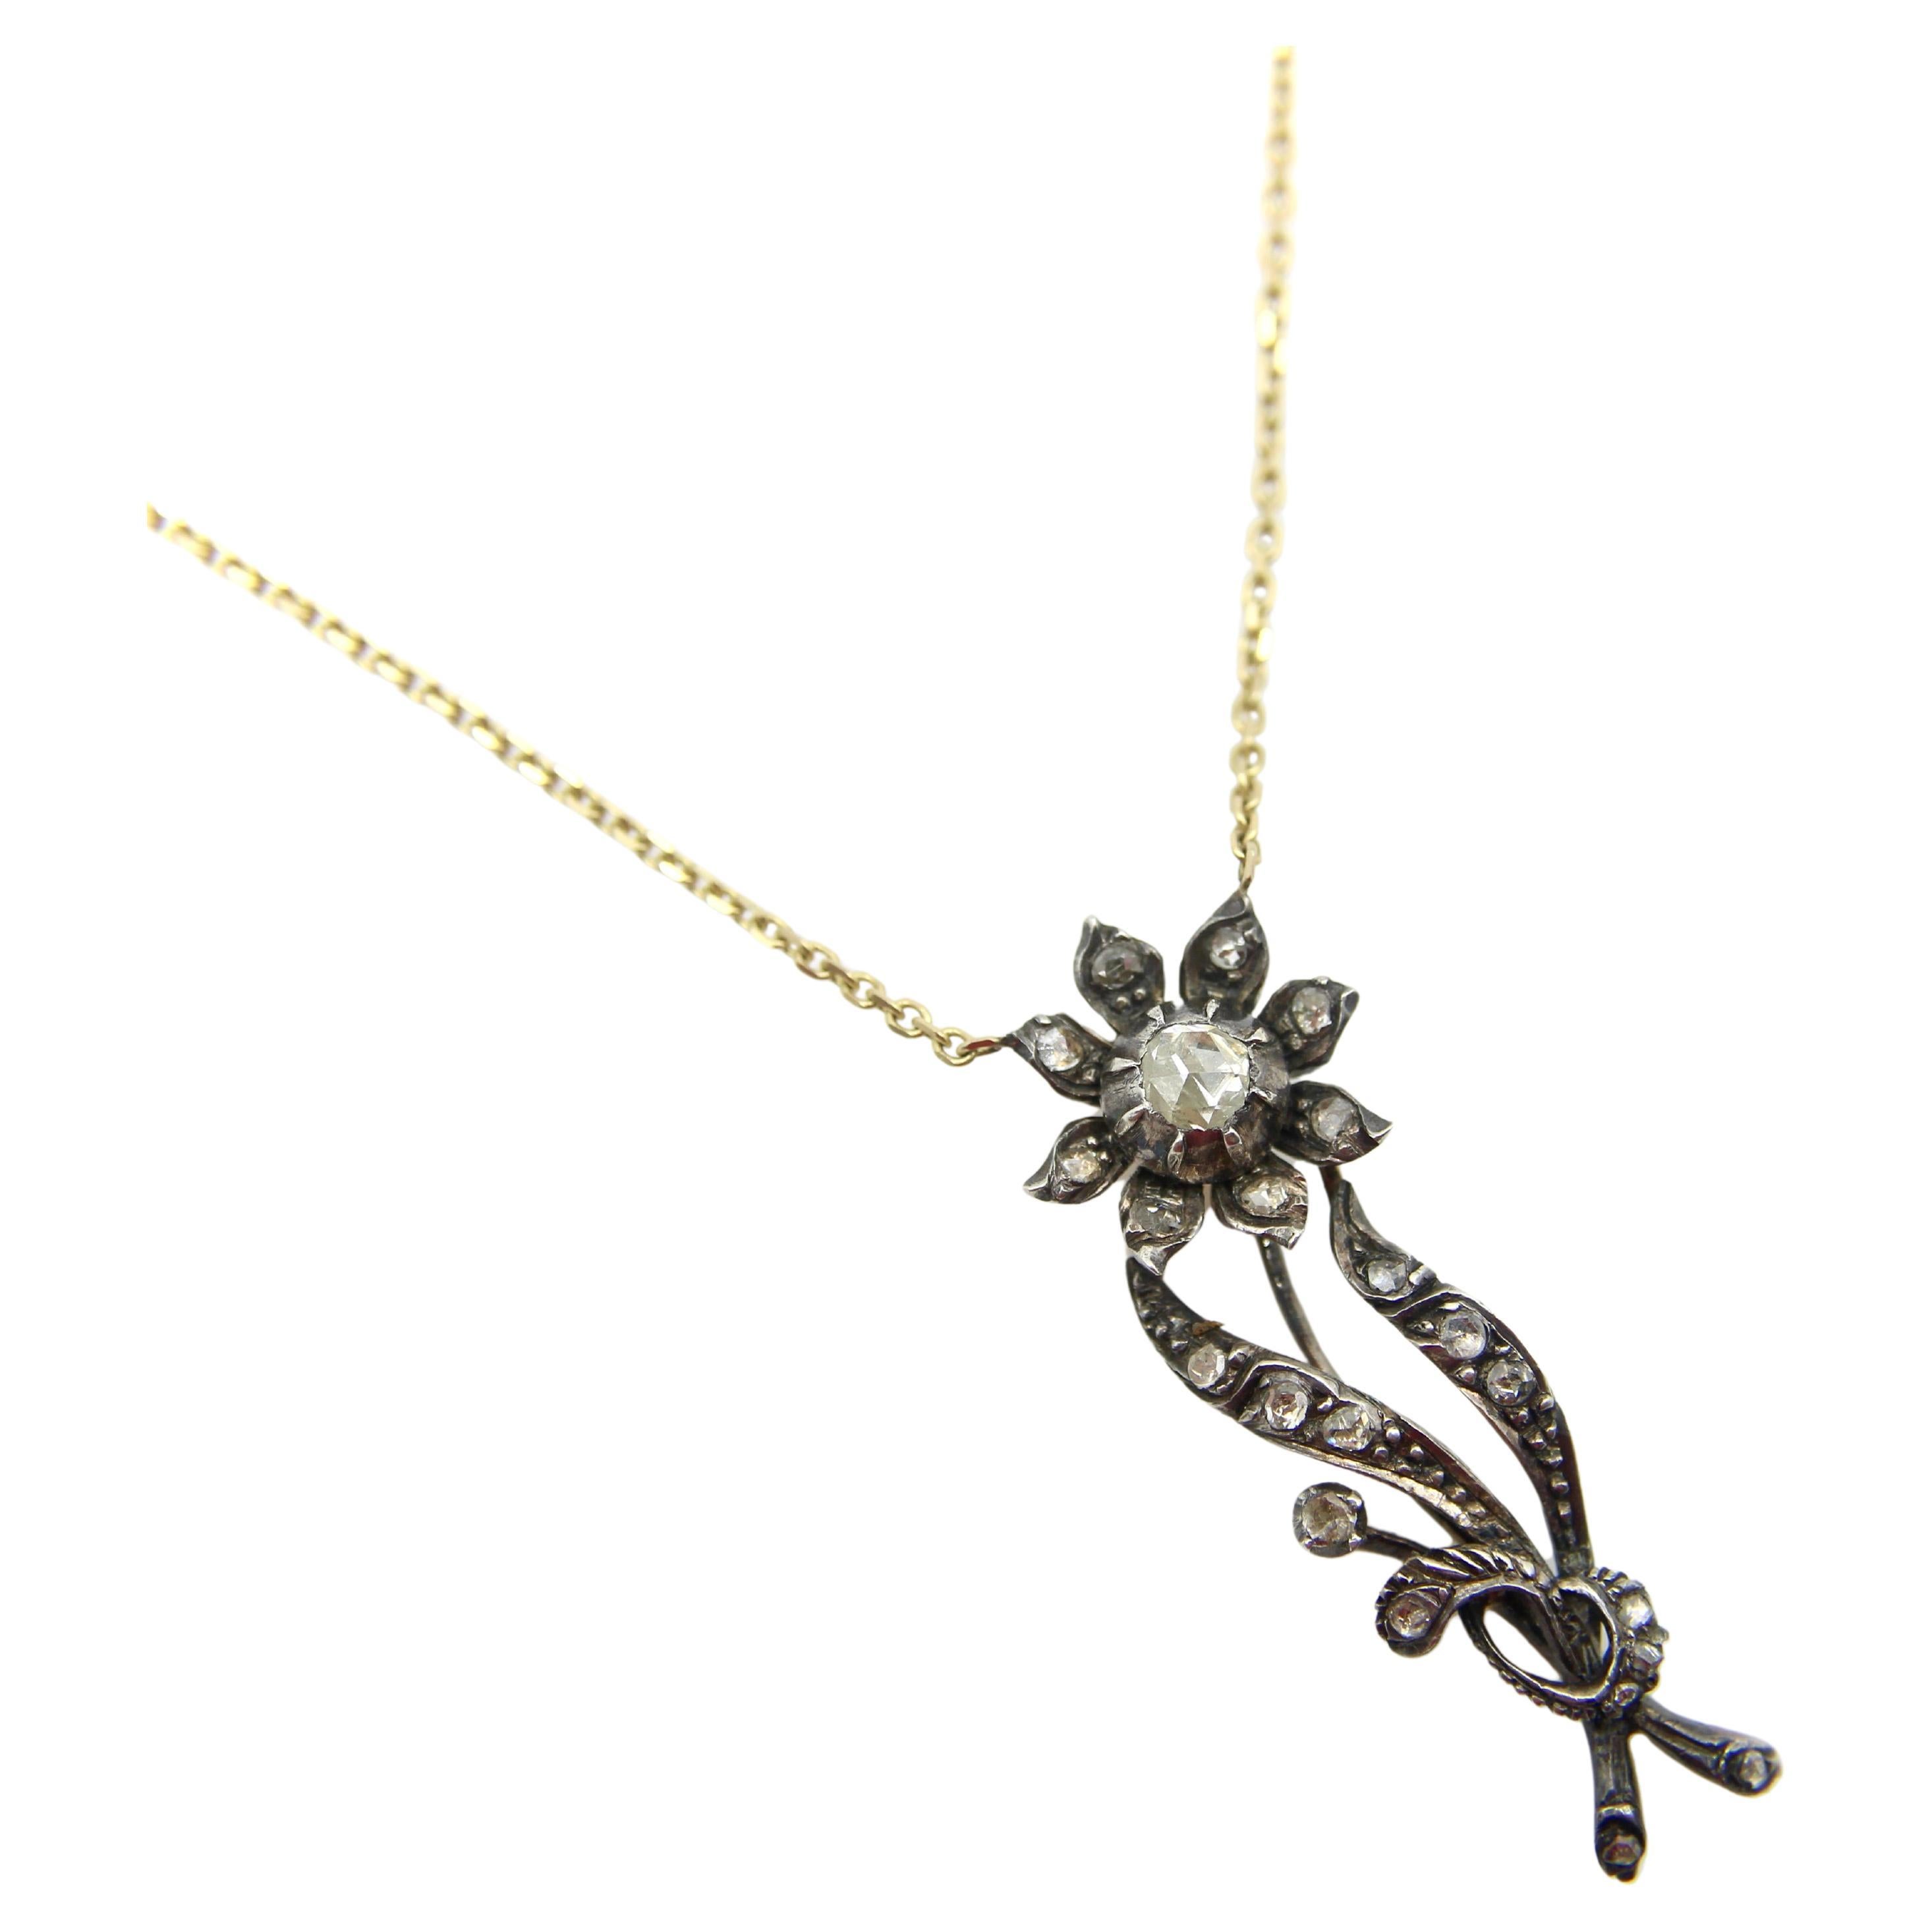 Dutch Early Victorian Rose Cut Diamond 14K Gold and Silver Flower Necklace